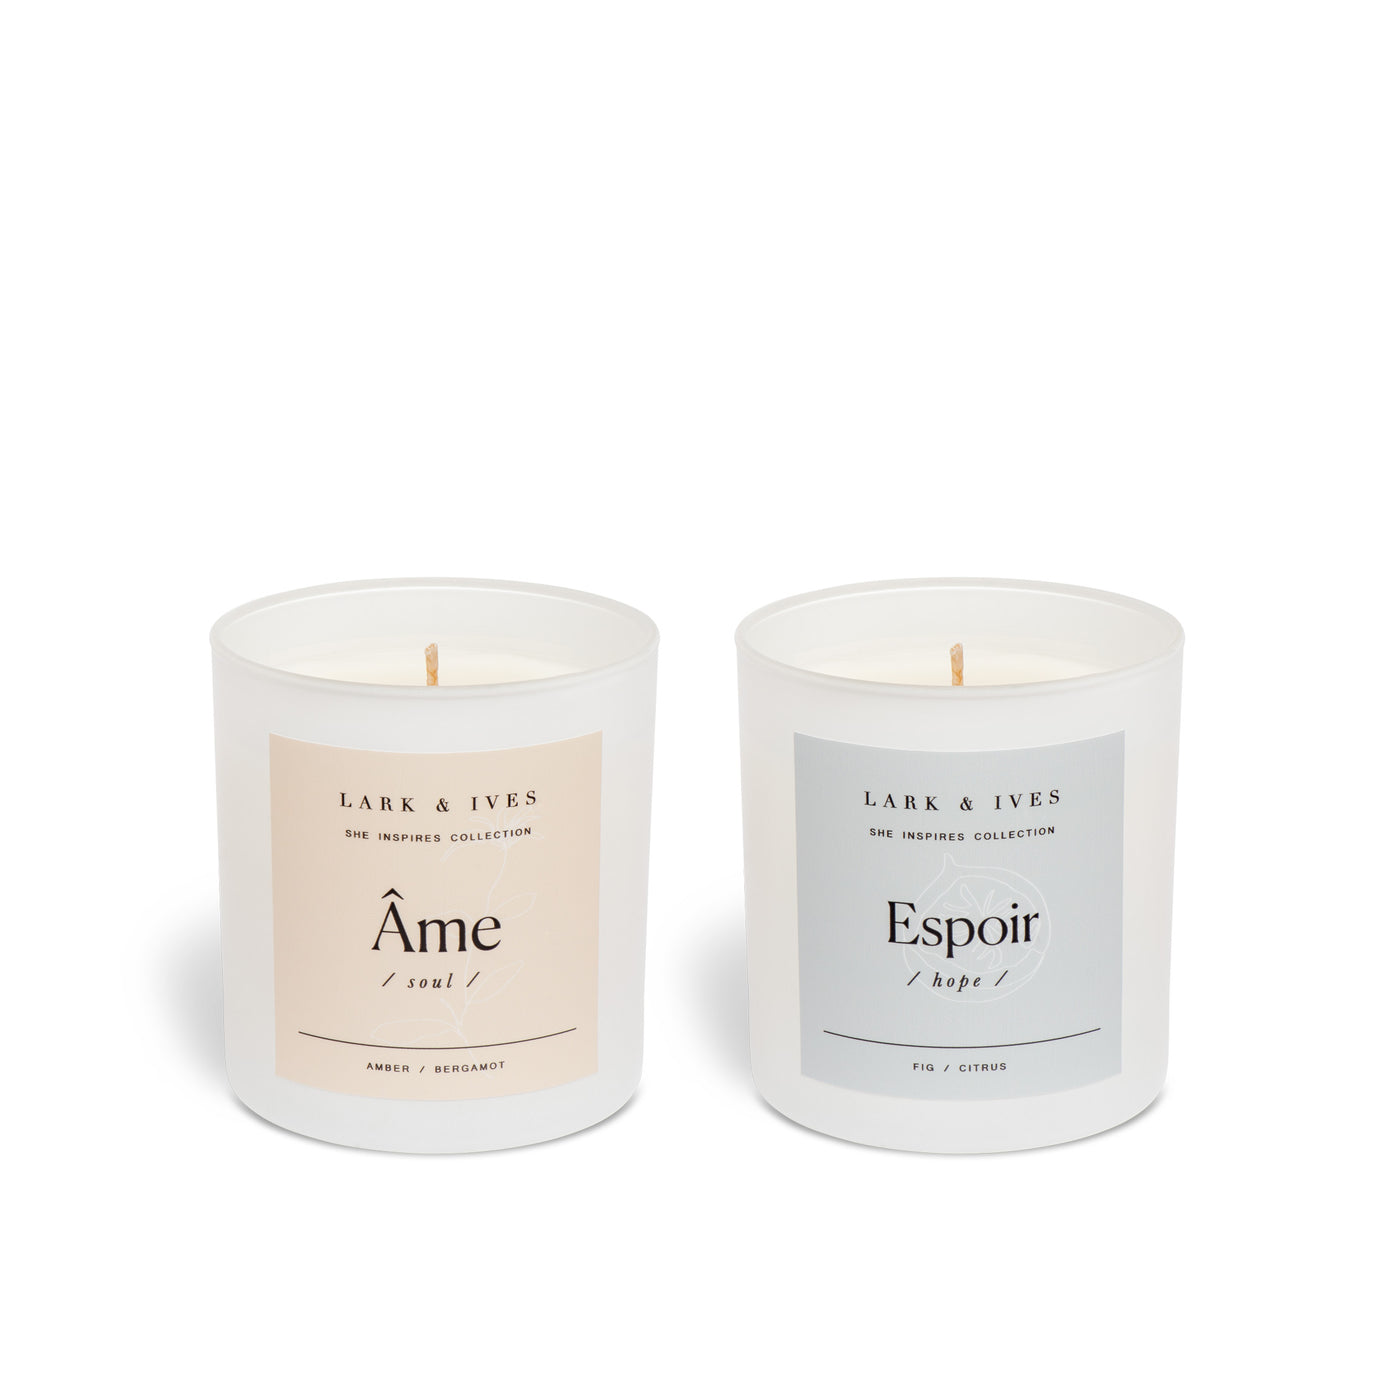 Lark and Ives / Candle / Soy Candle / Essential Oil Candle / Cruelty Free / Fair Trade / Ethical Goods / Set of two candles / Gift Guide / Gift Ideas / Ame and Espoir